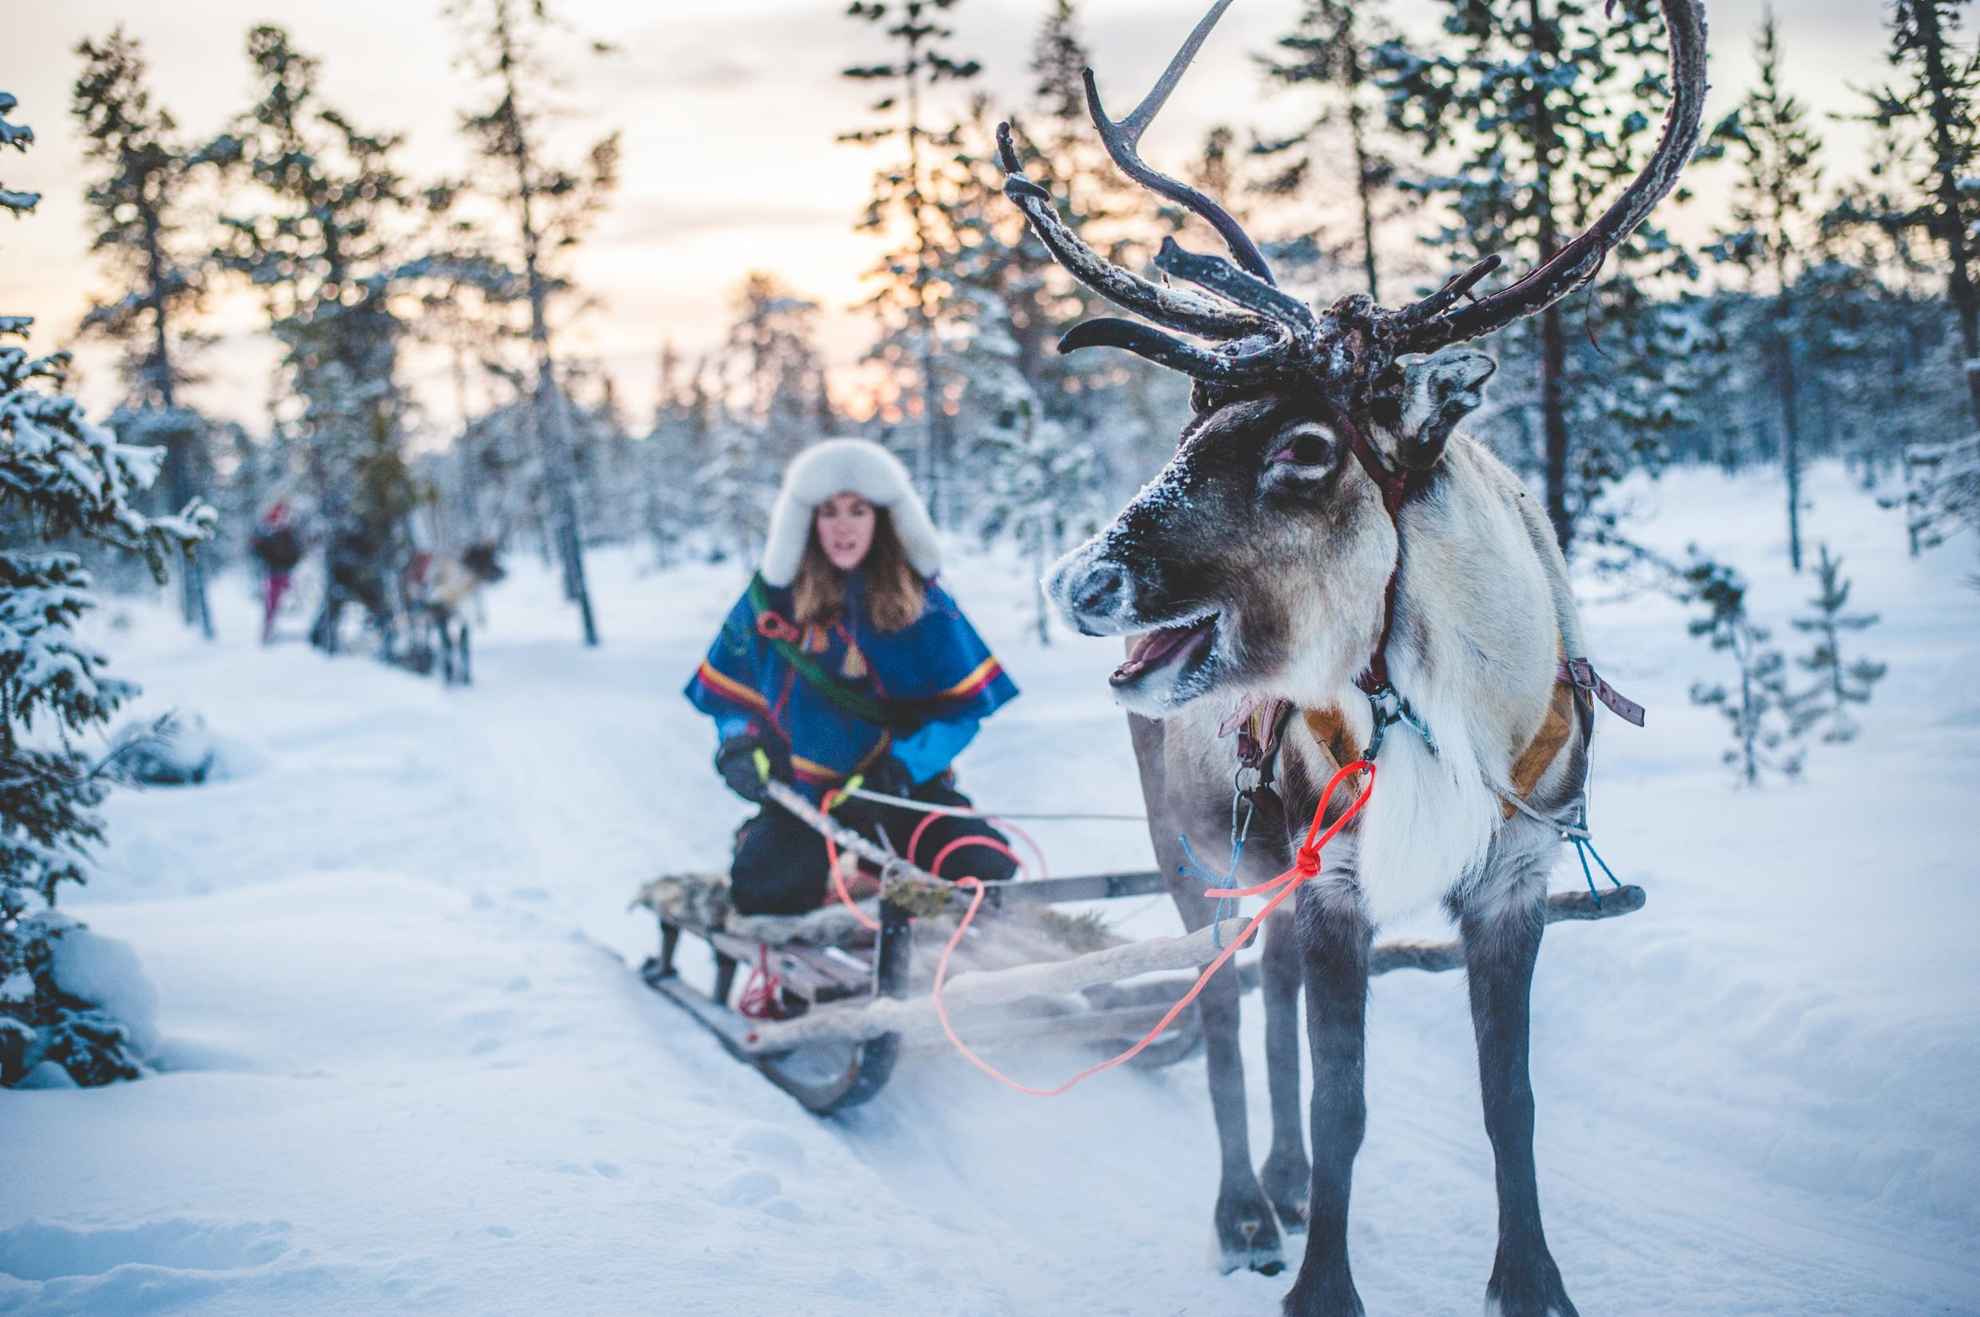 A Sami woman rides in a reindeer sled in a snowy winter forest.